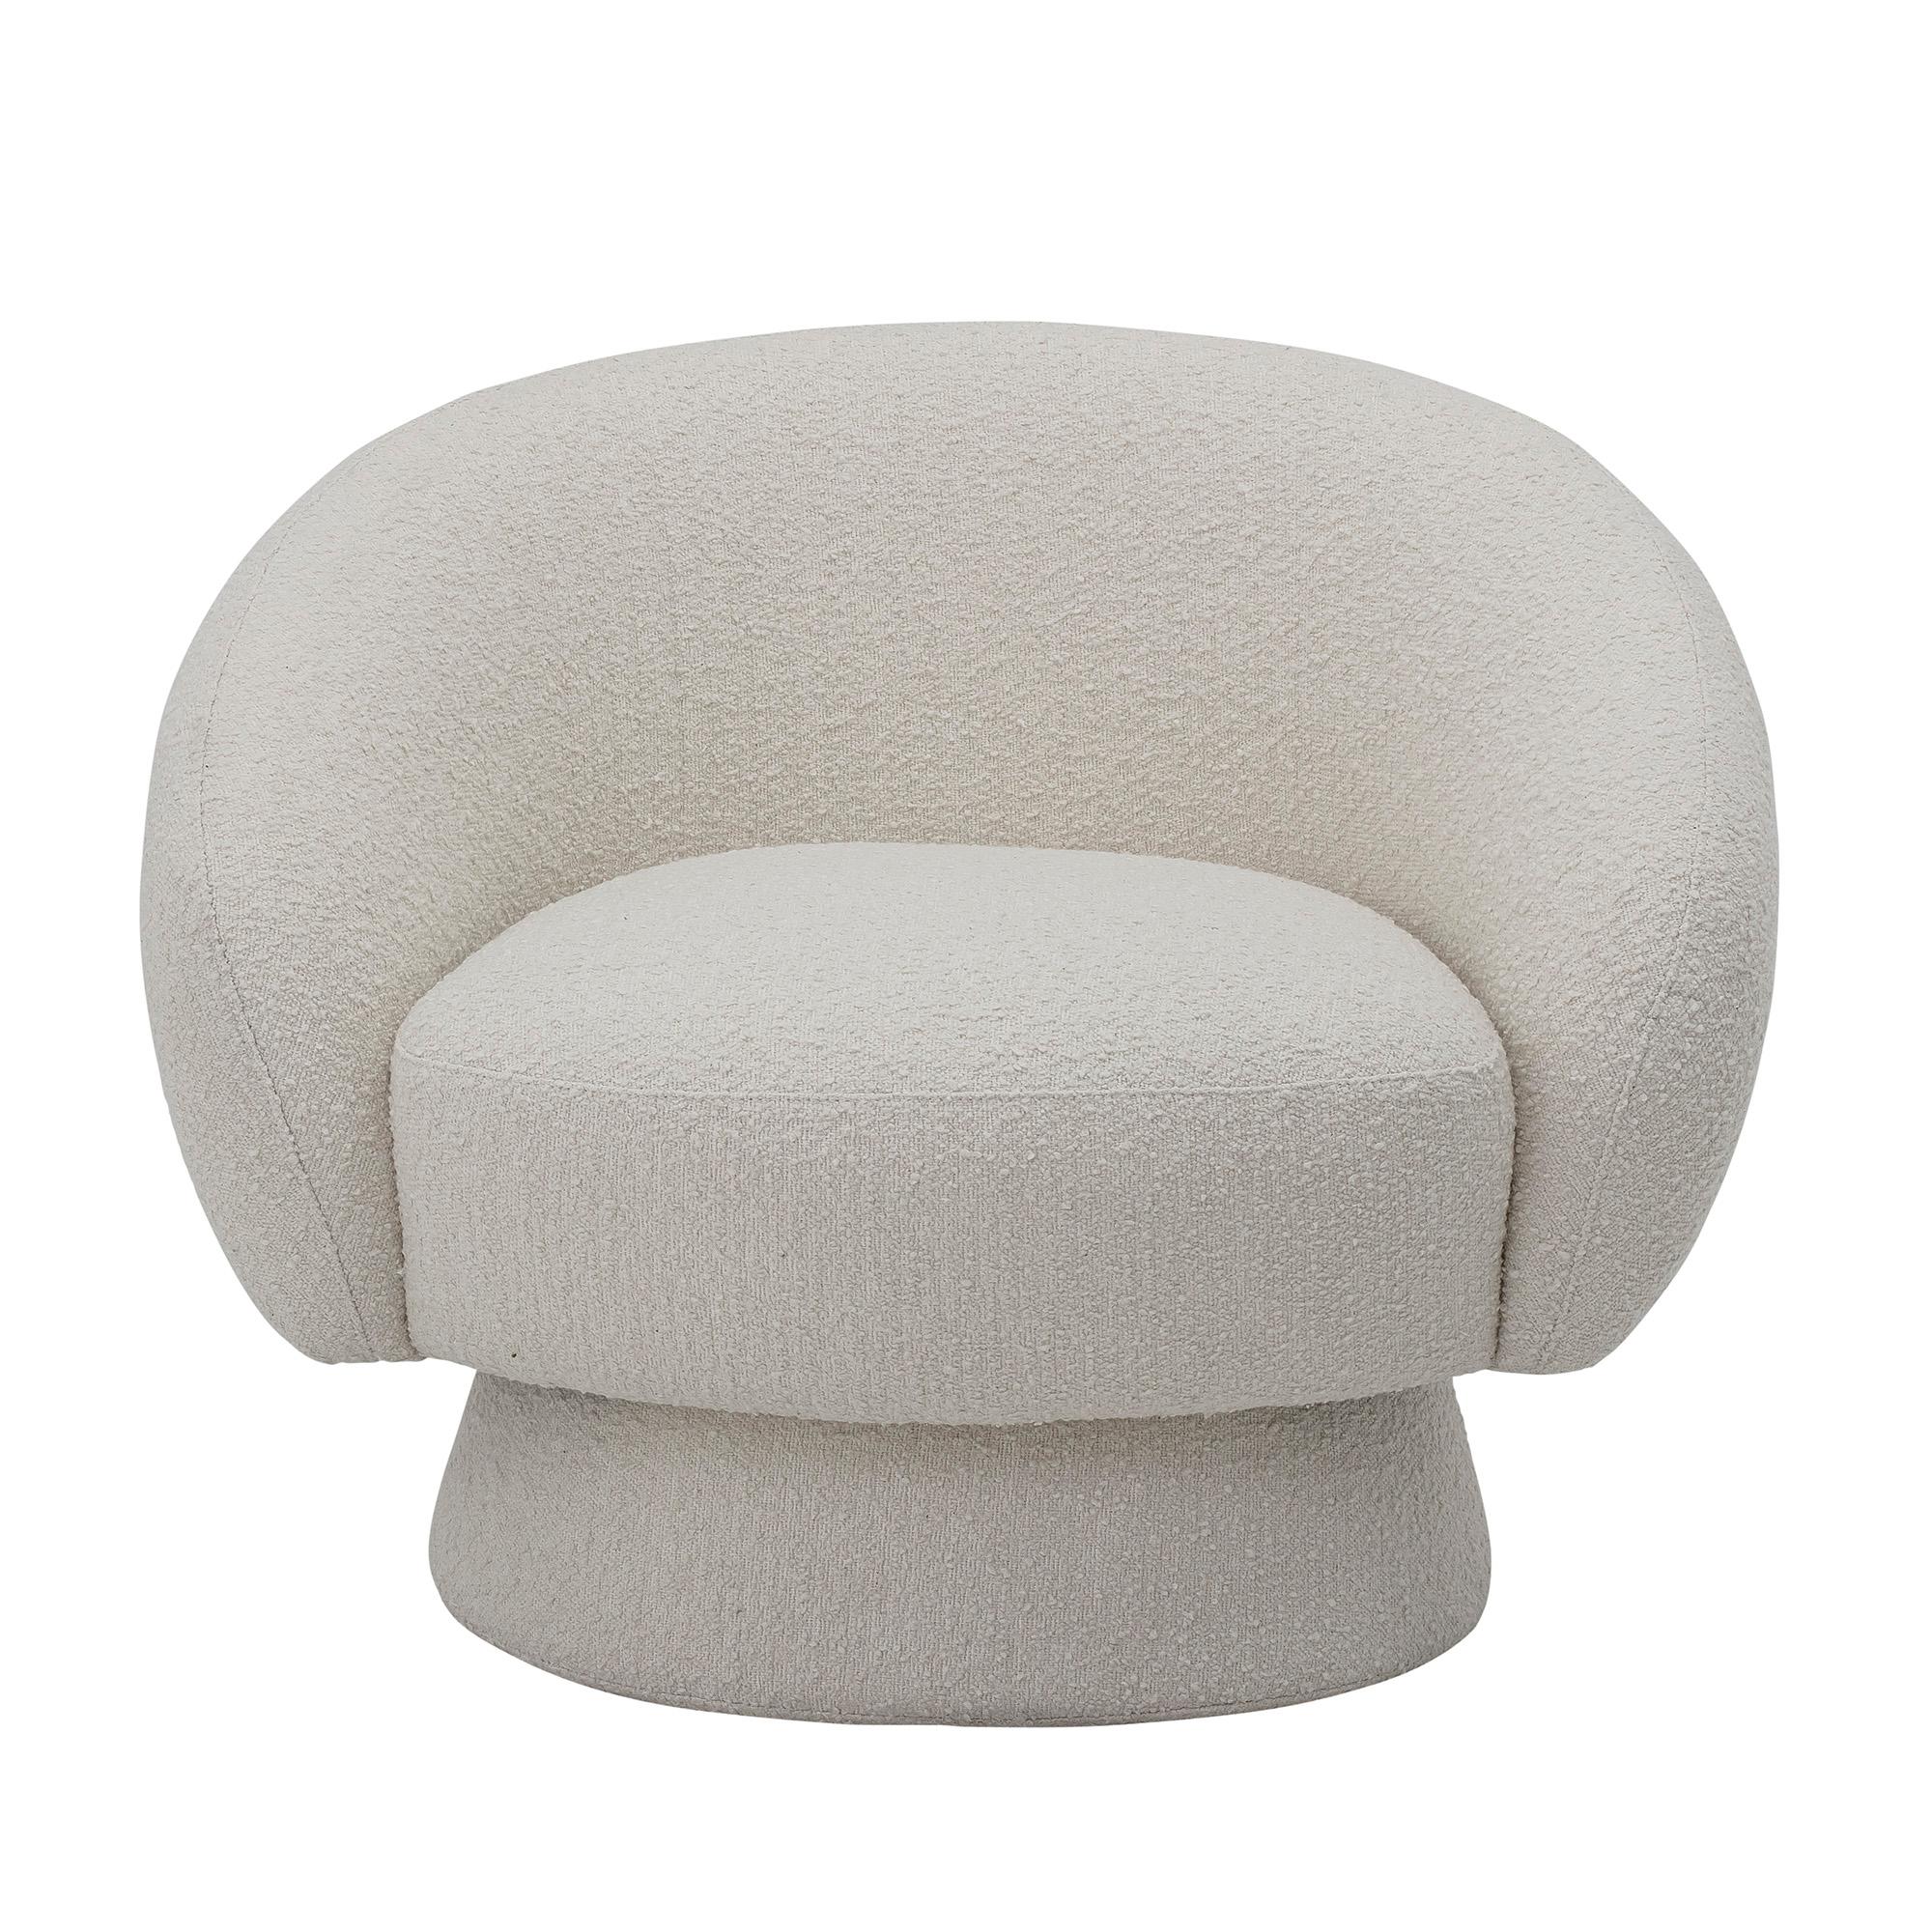 Curved formed circular base lounge chair with a curved-arm integrated back, hard-wood frame. Standard model in an off-white bouclé fabric. Bespoke modifications and COM options are also available.